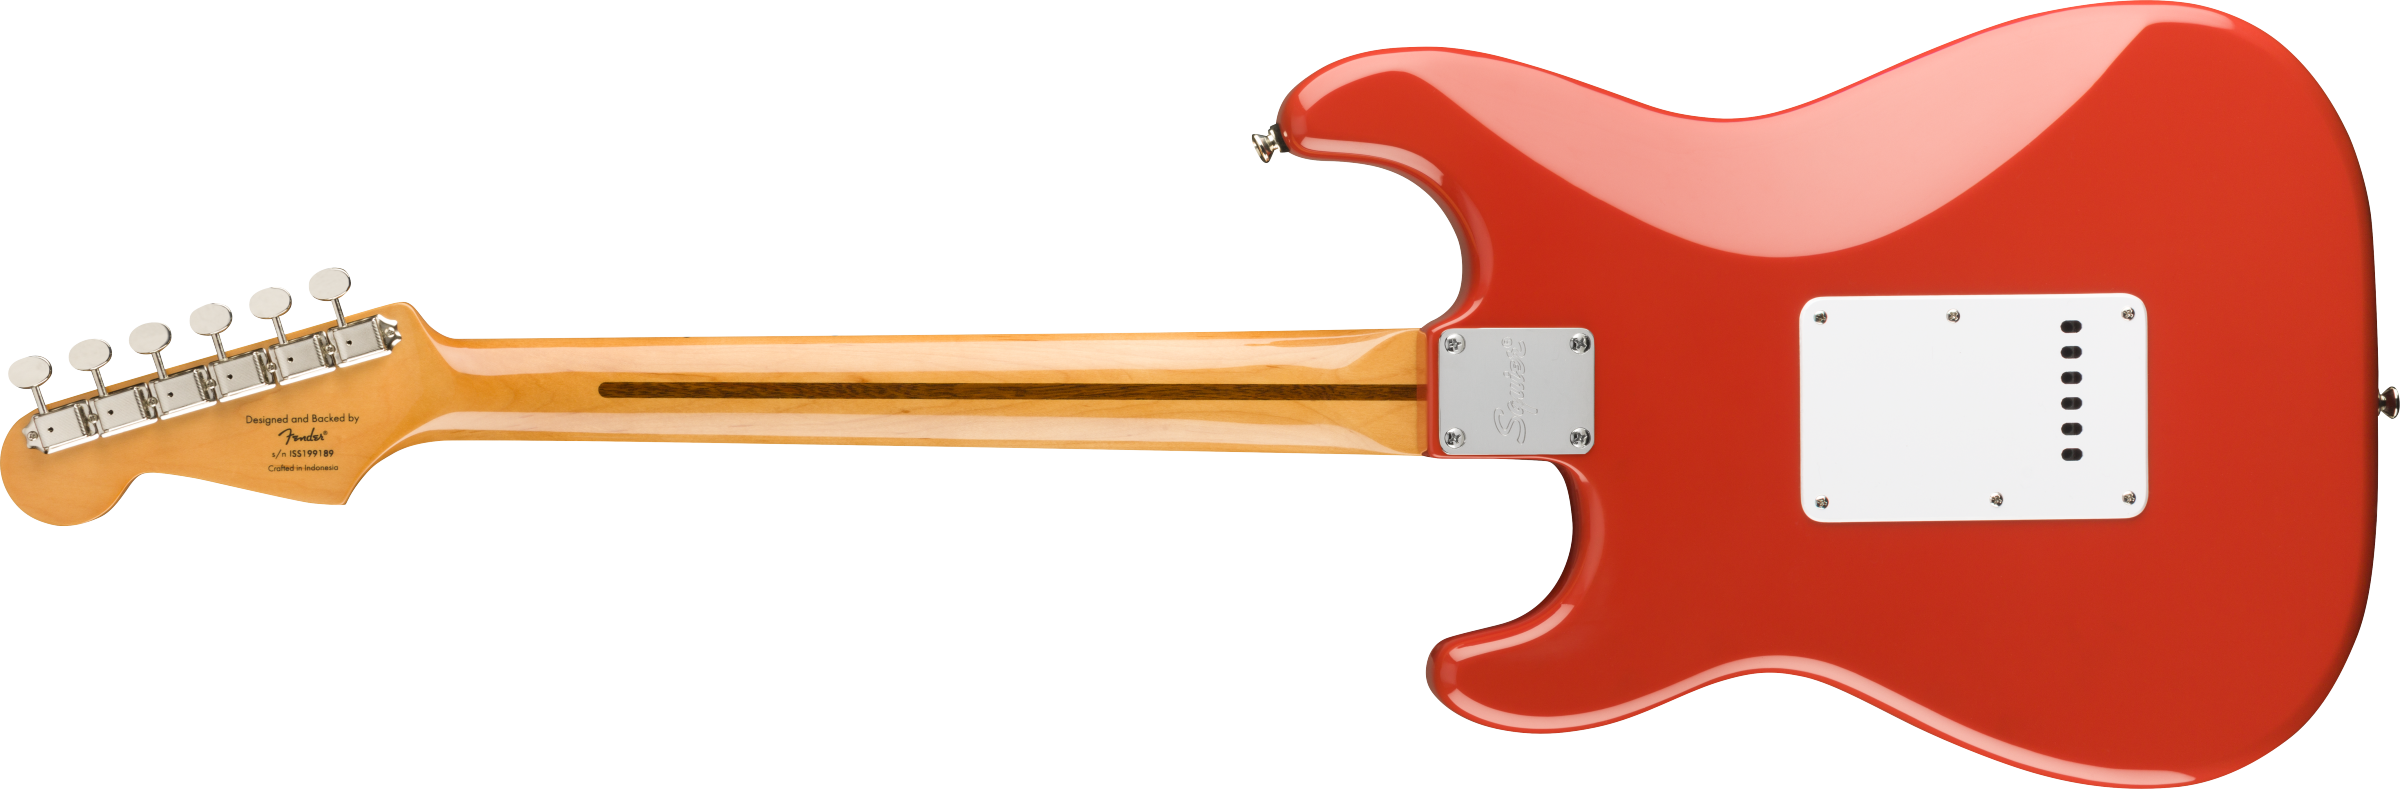 Squier Classic Vibe 50s Stratocaster Maple Fingerboard, Fiesta Red 0374005540